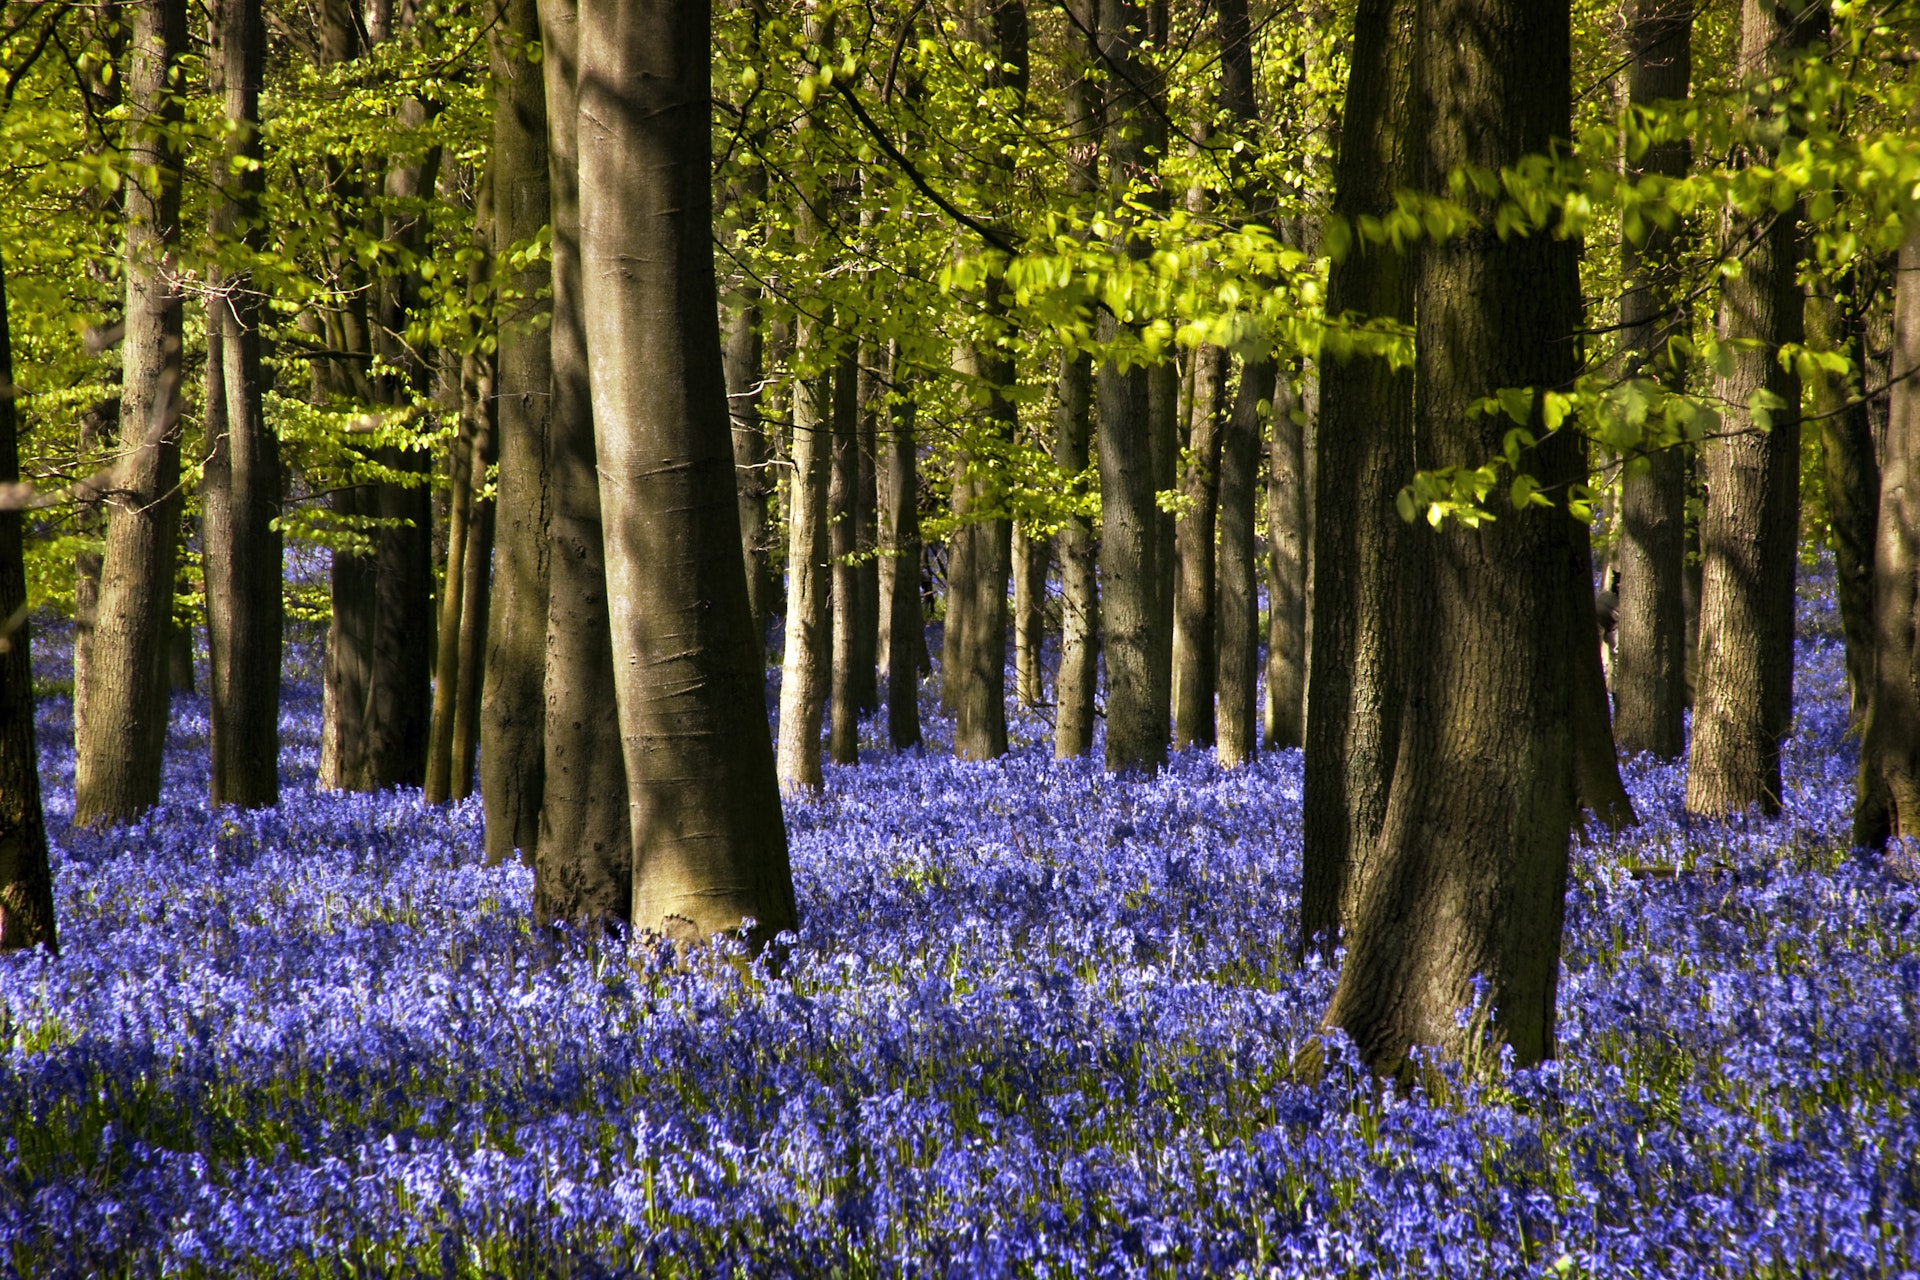 Bright blue bluebells cover the ground in woodland